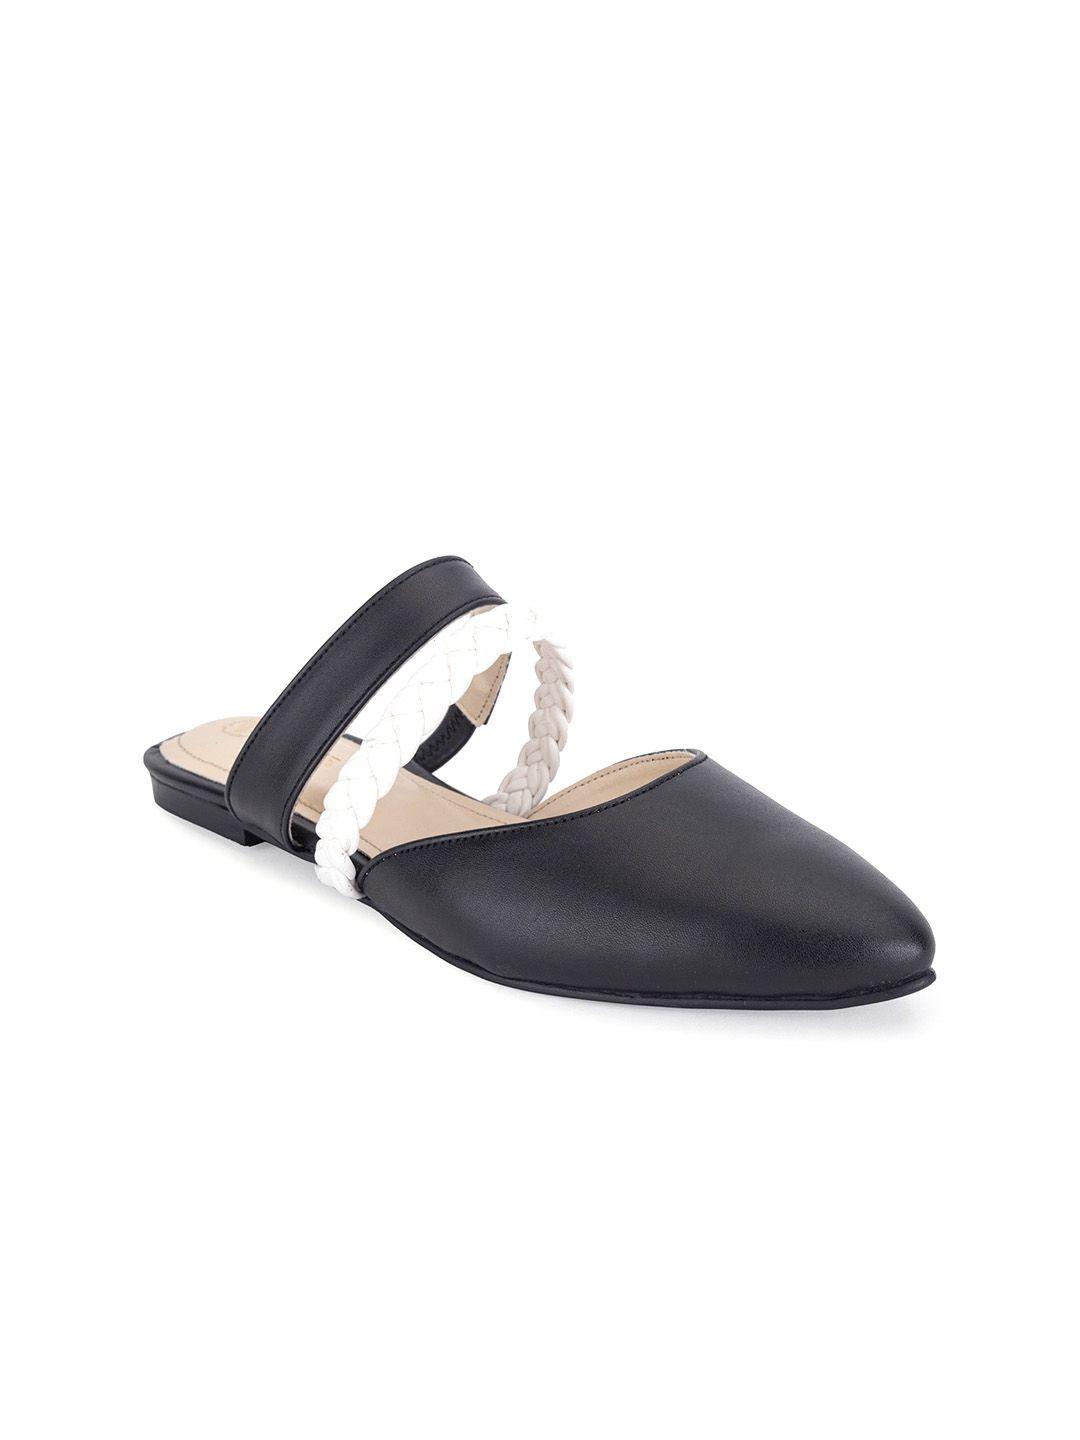 beaver strappy pointed toe mules